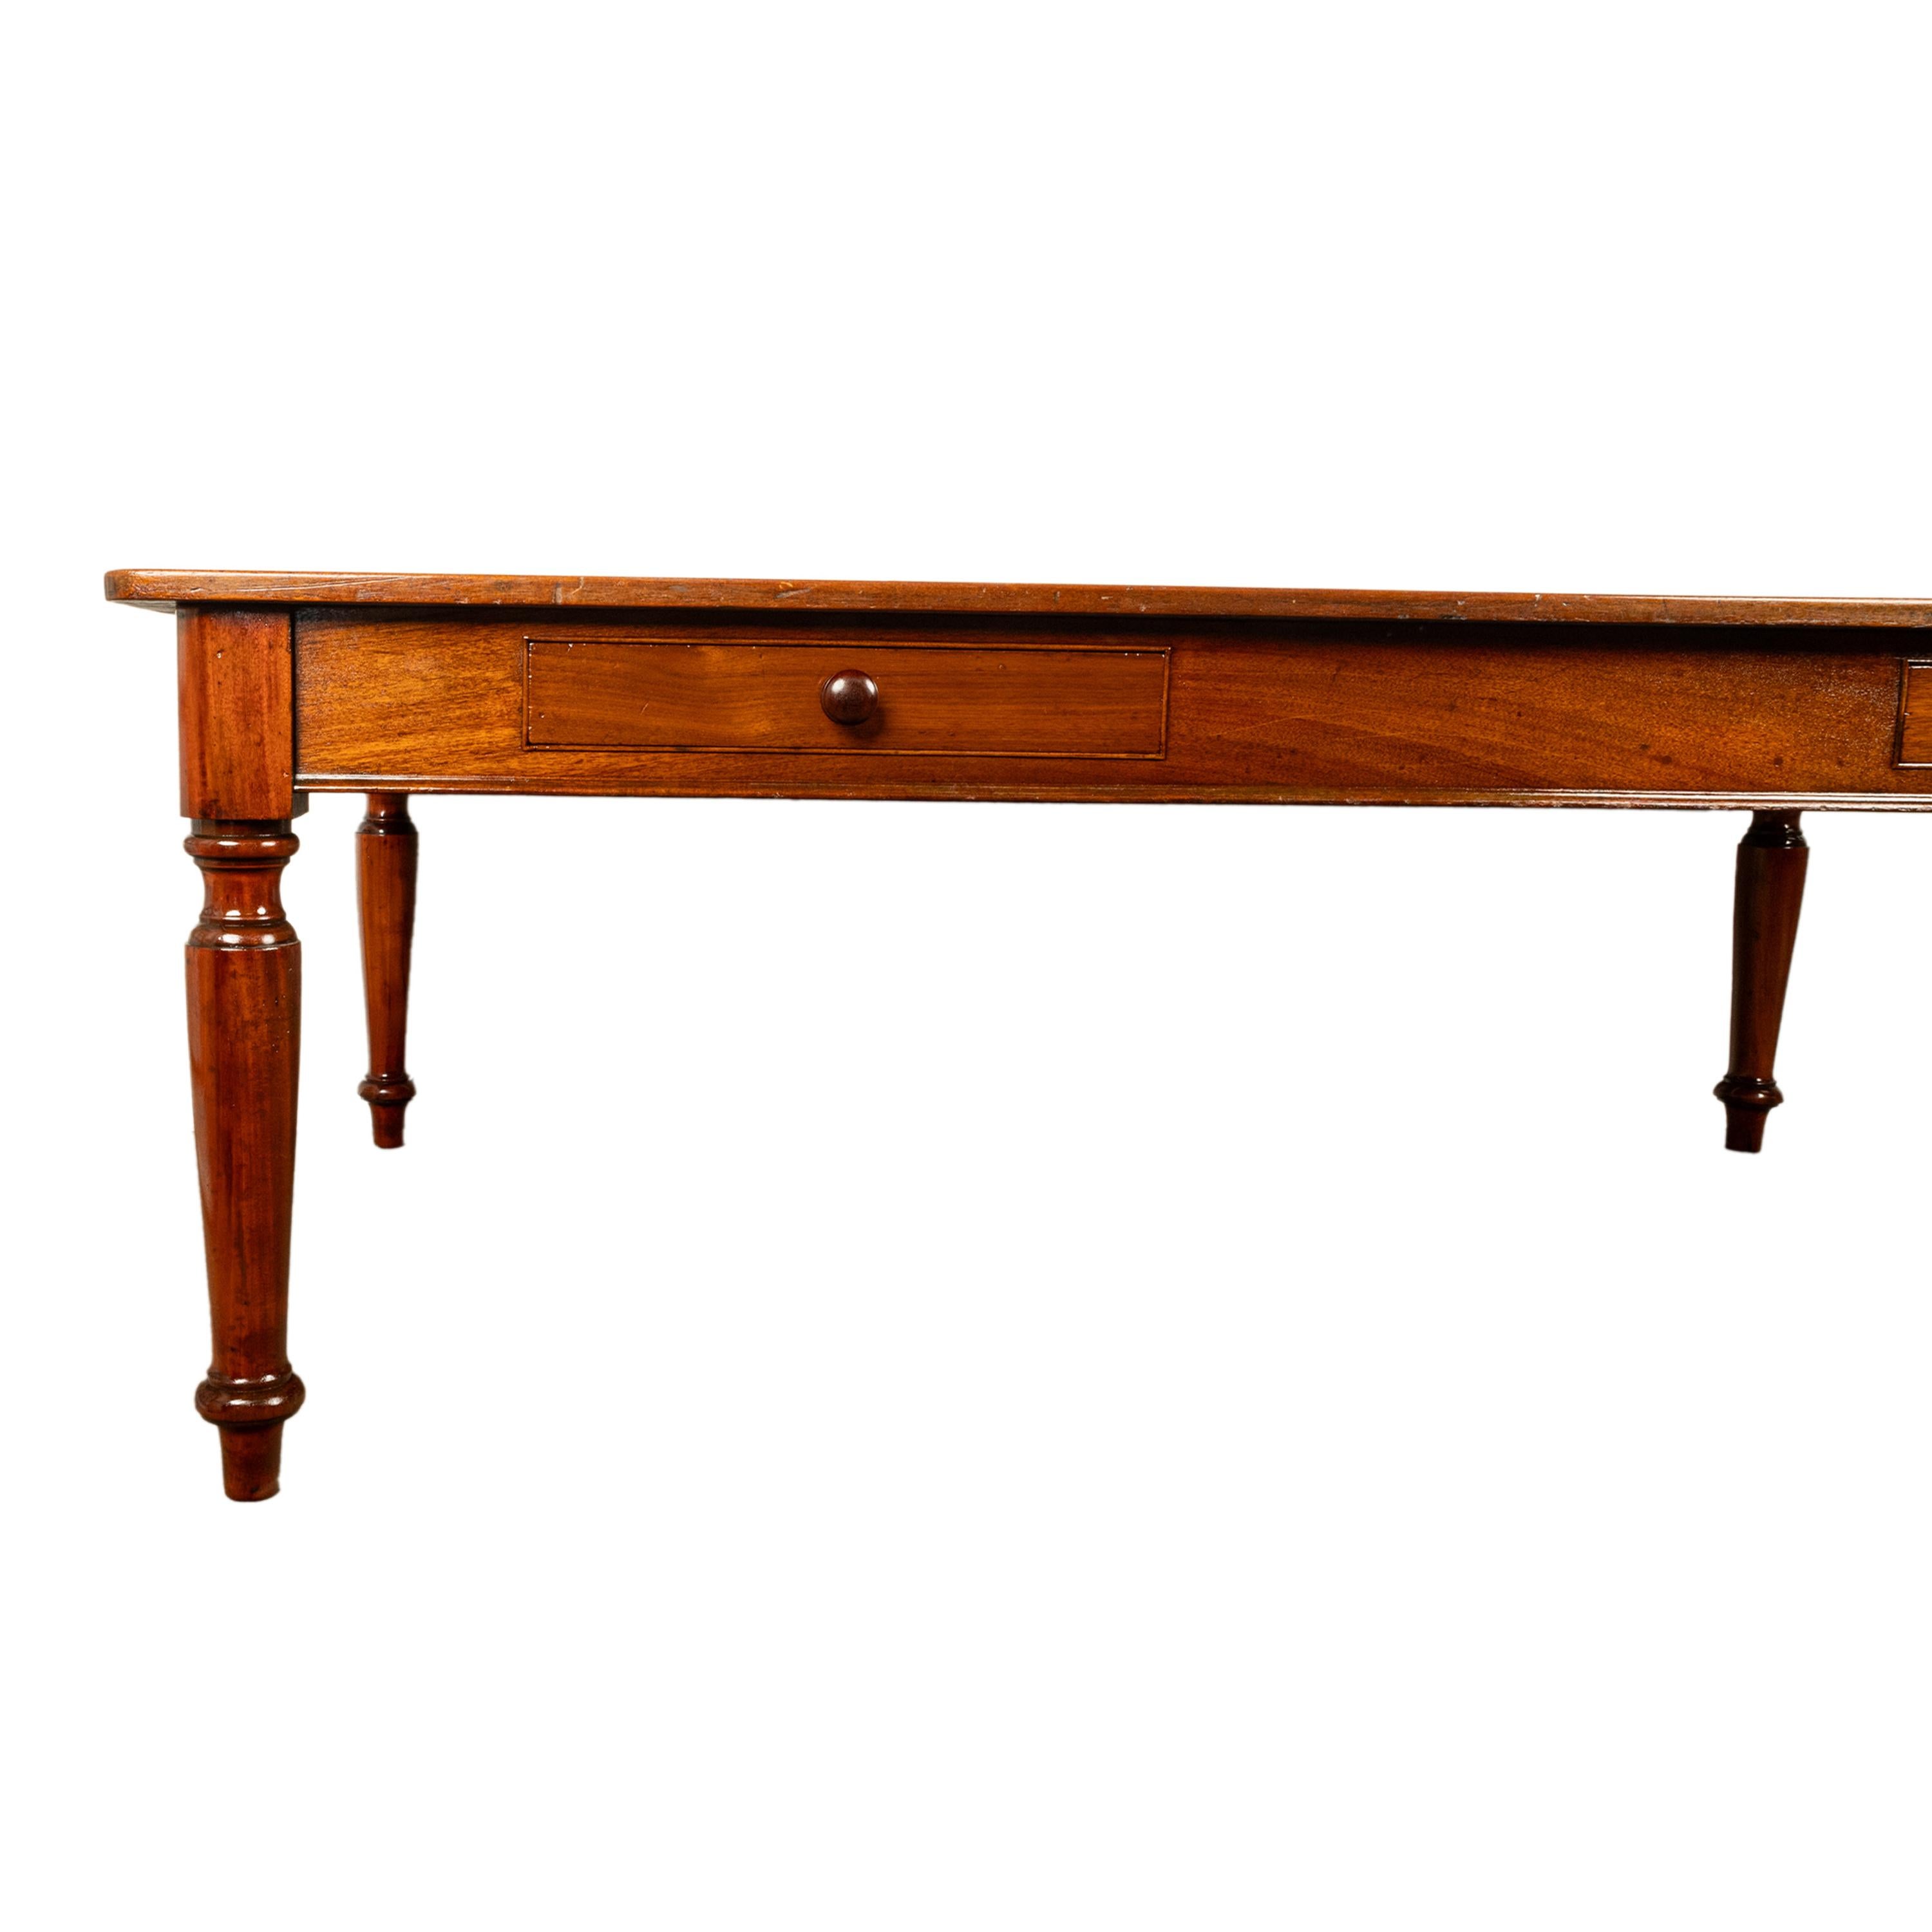 Antique Monumental 19th Century Mahogany Library Conference Dining Table 1860 For Sale 12